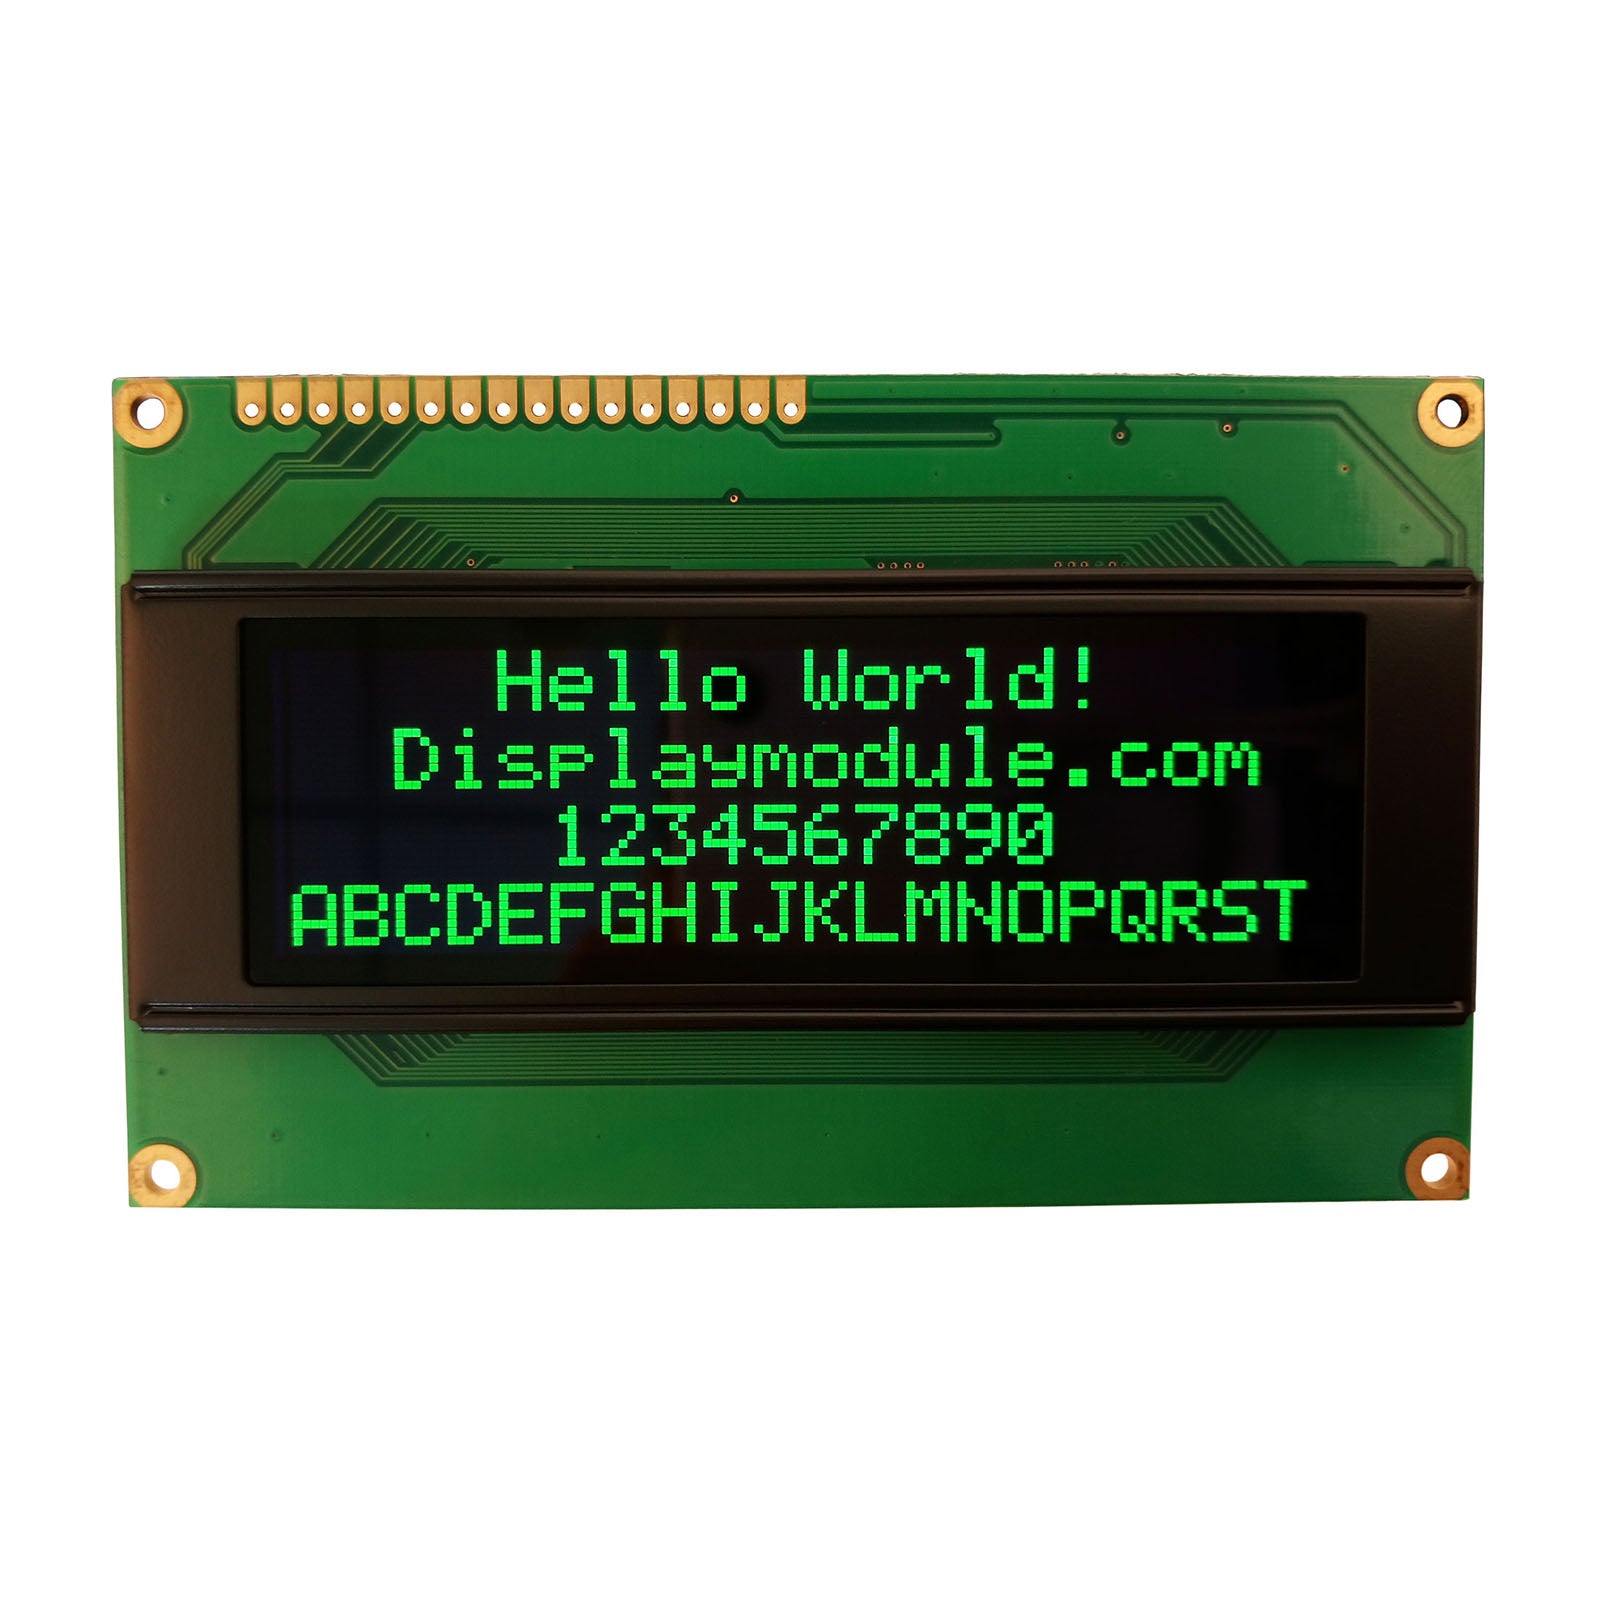 20x4 Character Monochrome OLED display module showing "Hello World!" with MCU, SPI, and I2C interfaces